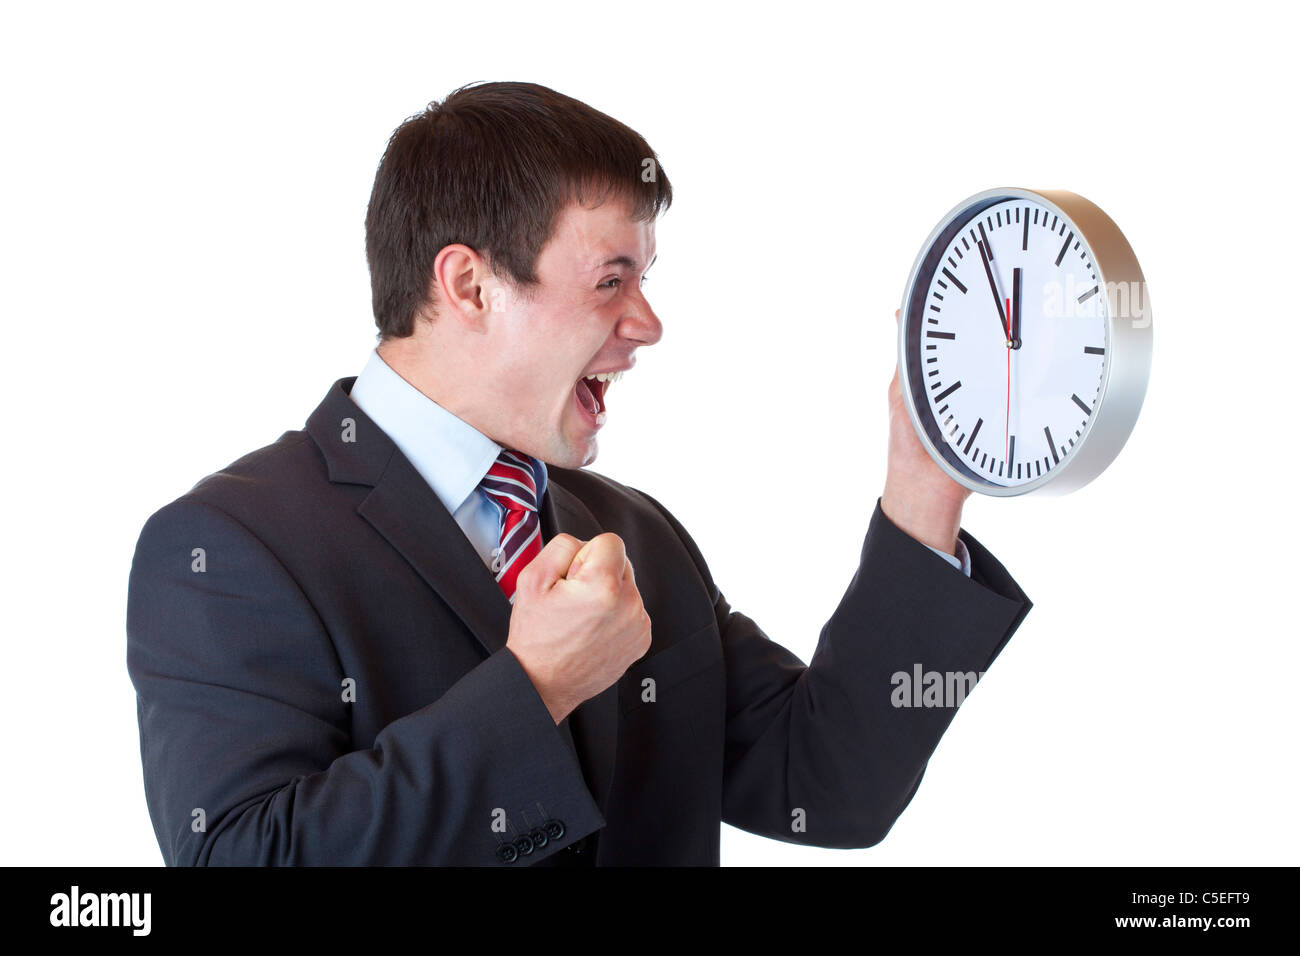 Stressed manager under time pressure clenches his fist and shouts.Isolated on white background Stock Photo